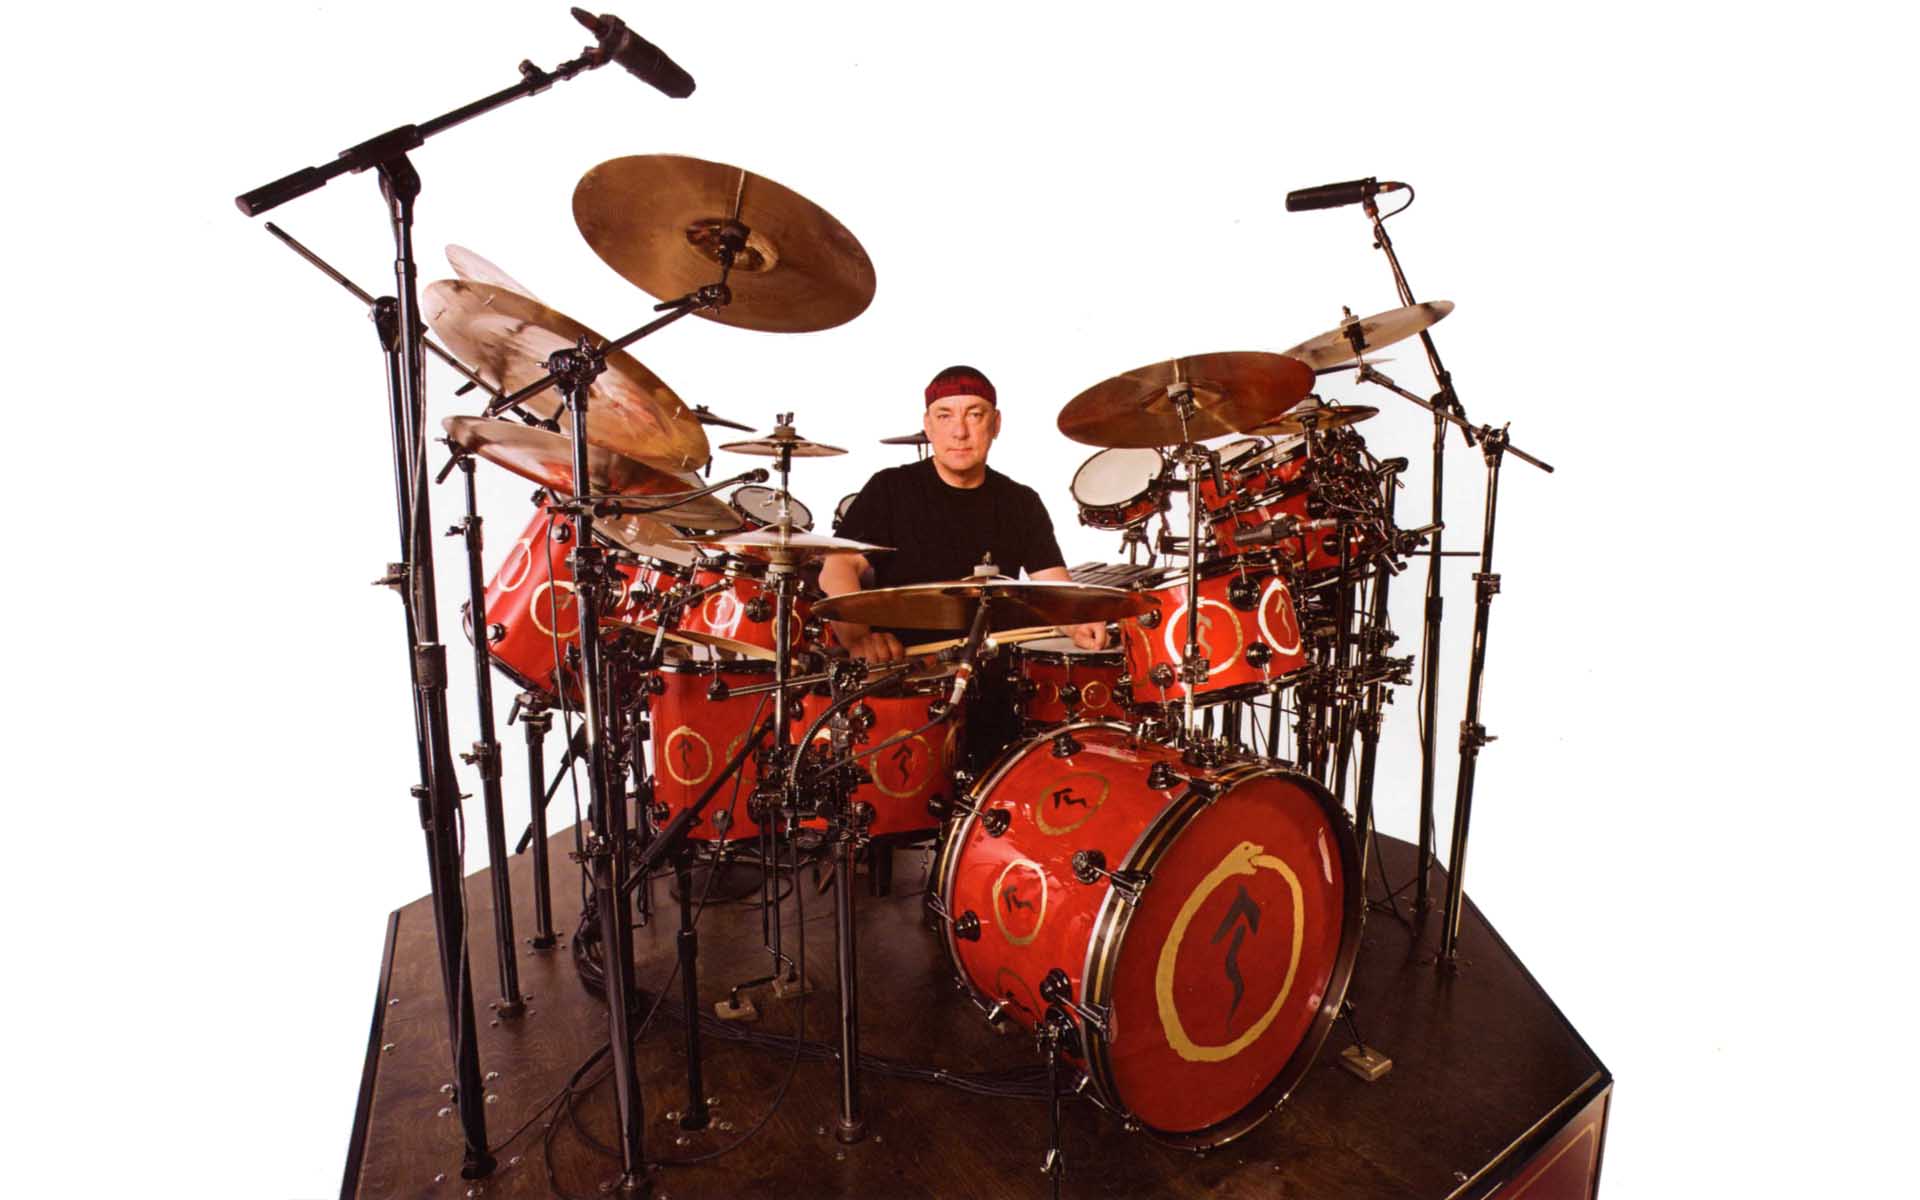 Neil Peart Snakes And Arrows Drum Kit - HD Wallpaper 